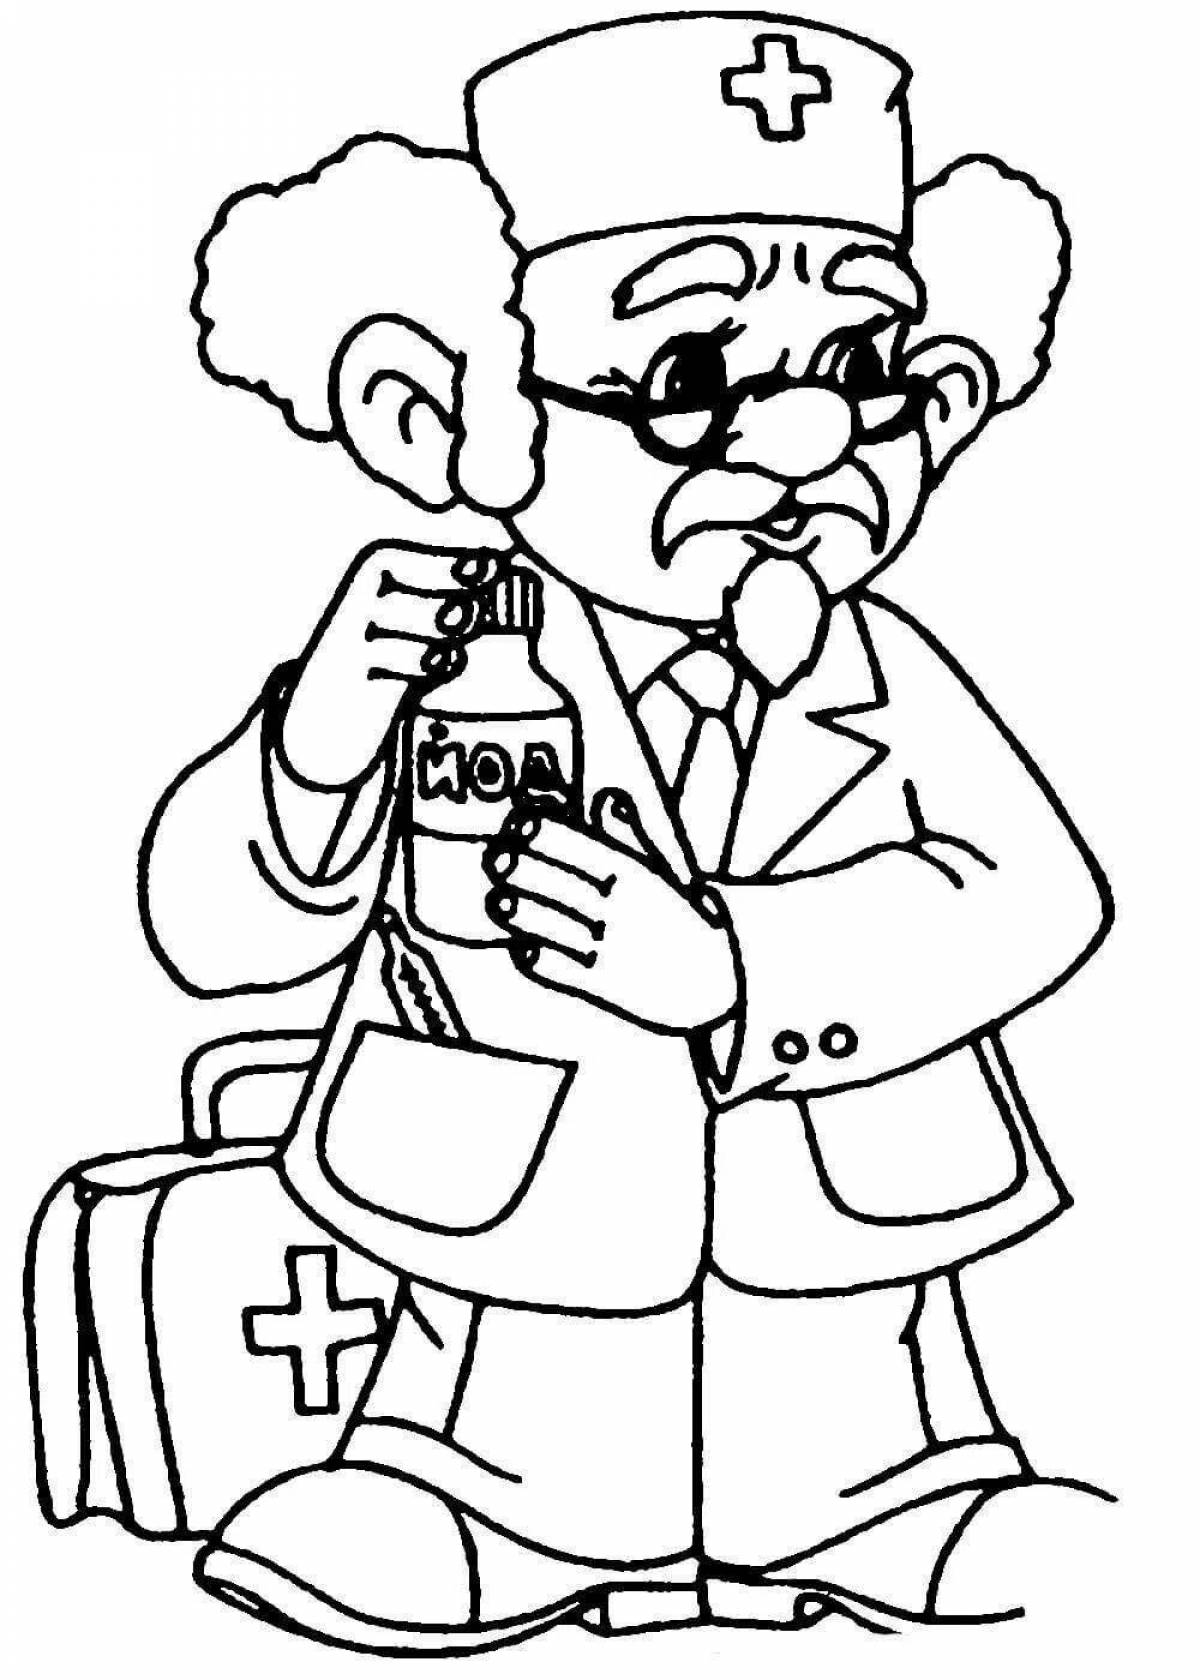 Playful doctor doctor coloring page